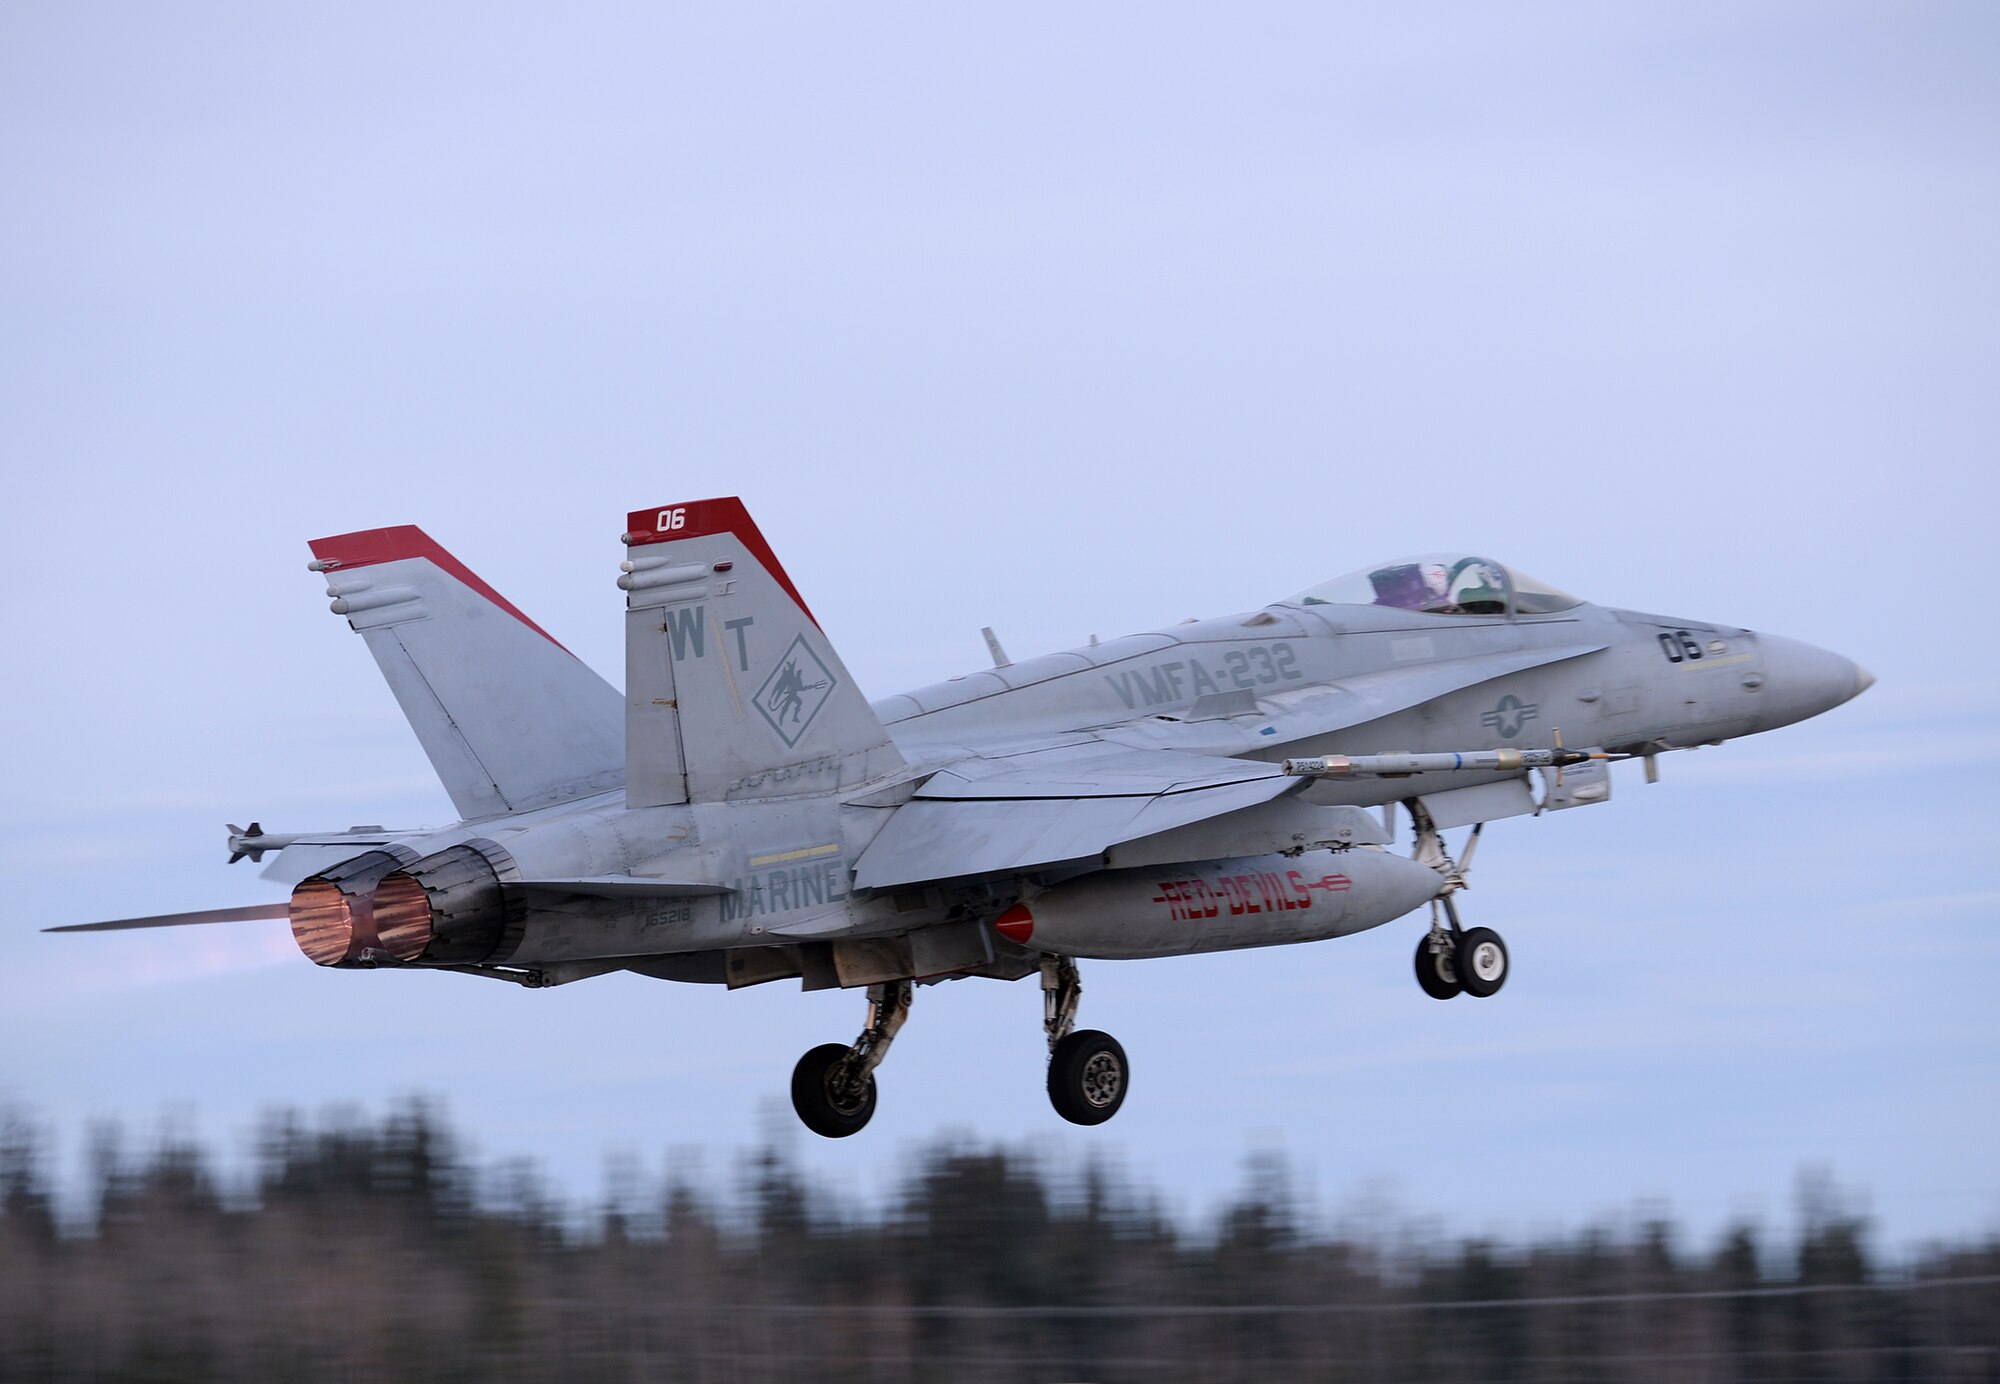 A U.S. Marine Corps F/A-18C Hornet aircraft from Marine Fighter Attack Squadron (VMFA) 232 out of Marine Corps Air Station Miramar, Calif., takes off from Eielson Air Force Base, Alaska, Oct. 10, 2016, for the first RED FLAG-Alaska (RF-A) 17-1 combat training mission. RF-A is a series of Pacific Air Forces commander-directed field training exercises for U.S. and partner nation forces, which enables U.S. Marines in units like VMFA-232 to prepare for future combat and contingency operations in a realistic threat environment inside the Joint Pacific Alaska Range Complex. (U.S. Air Force photo by Master Sgt. Karen J. Tomasik)